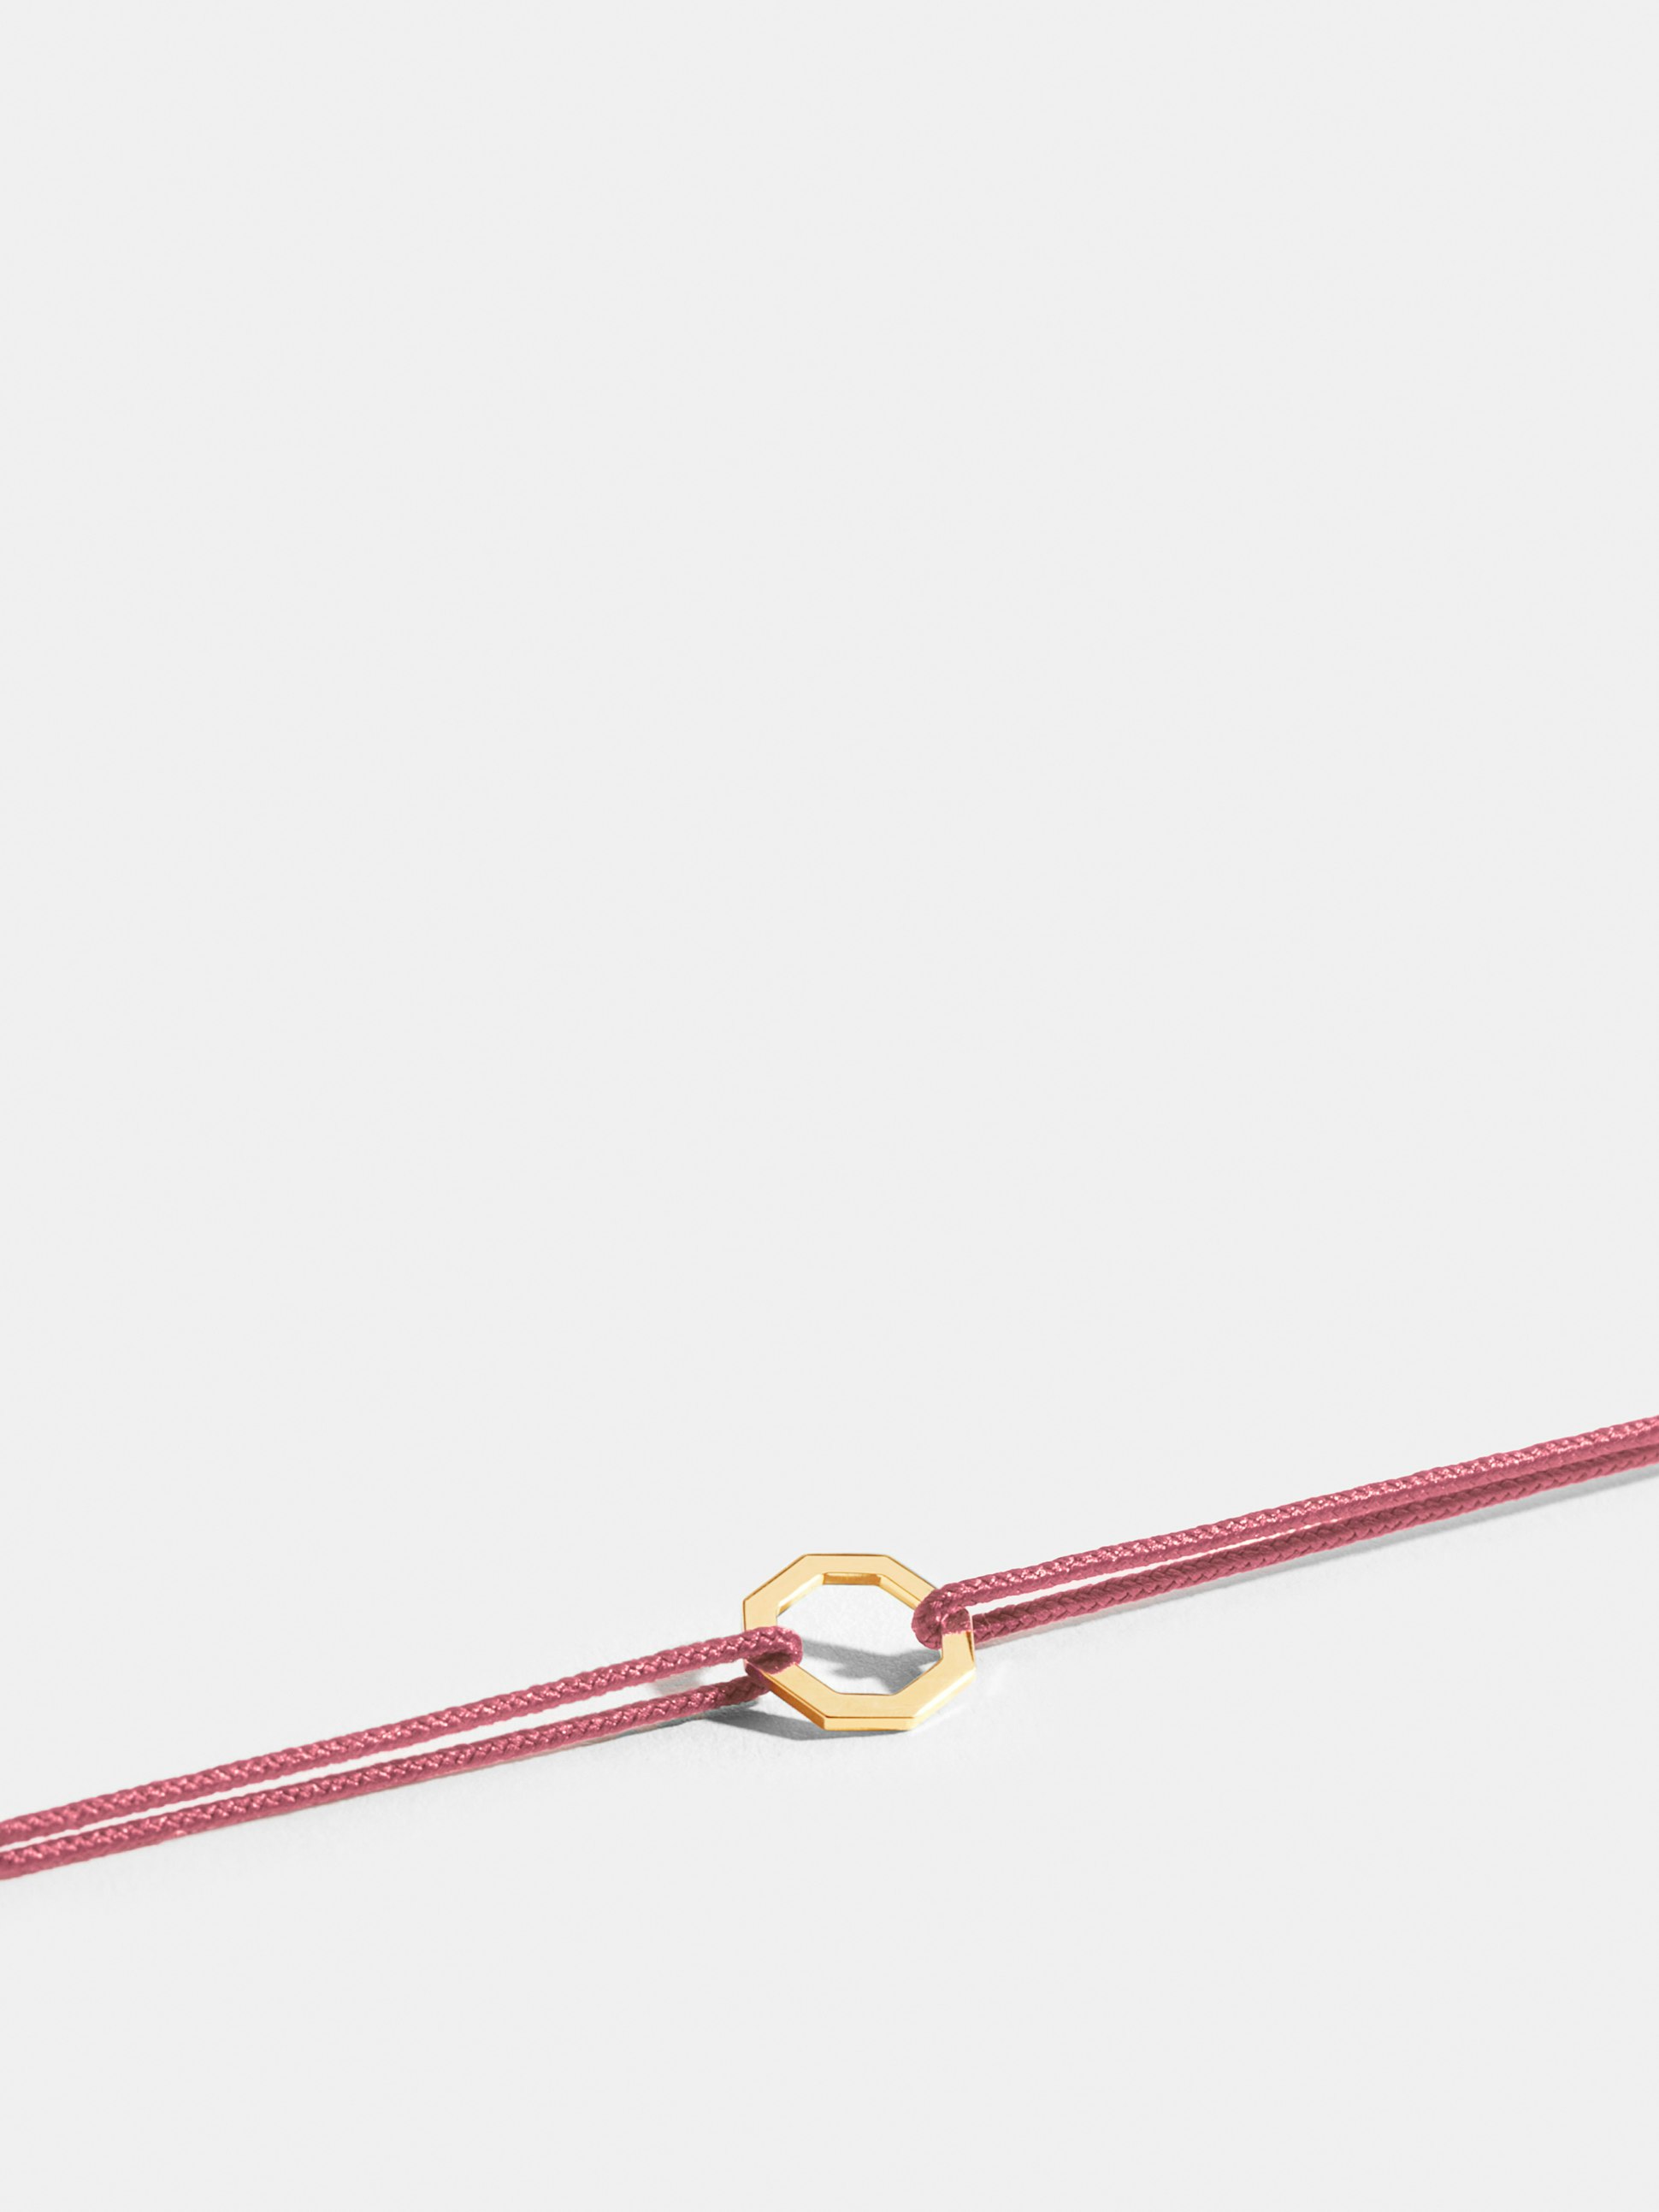 Octogone motif in 18k Fairmined ethical yellow gold, on an antique pink cord. 